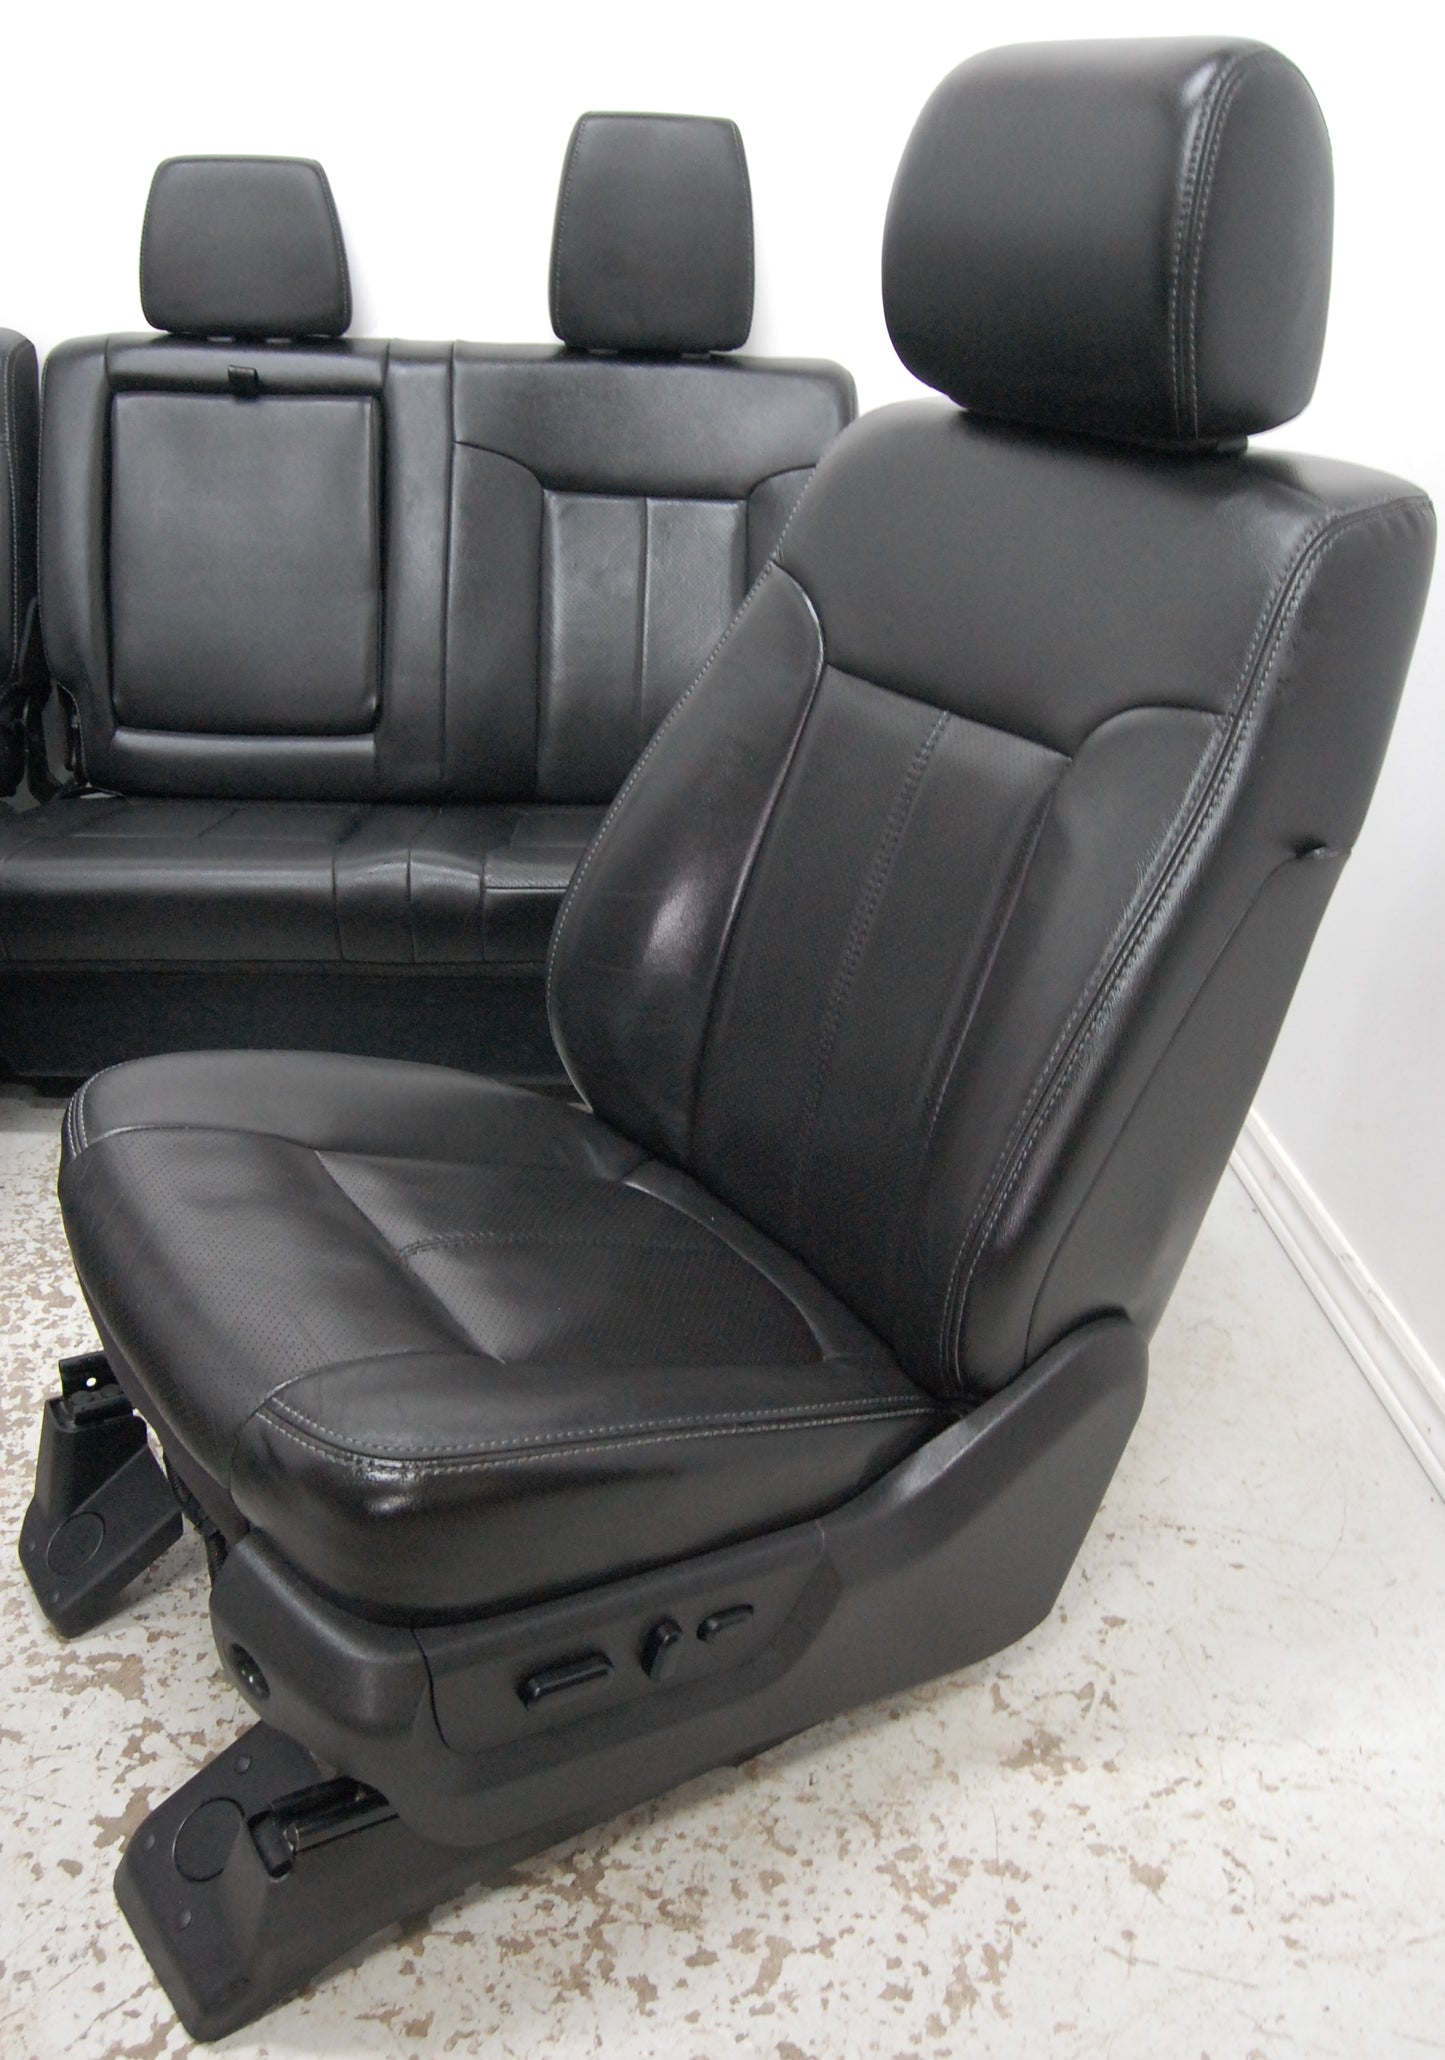 Ford F250 Superduty BLACK LEATHER Truck Seats Power Heated Cooled with Console